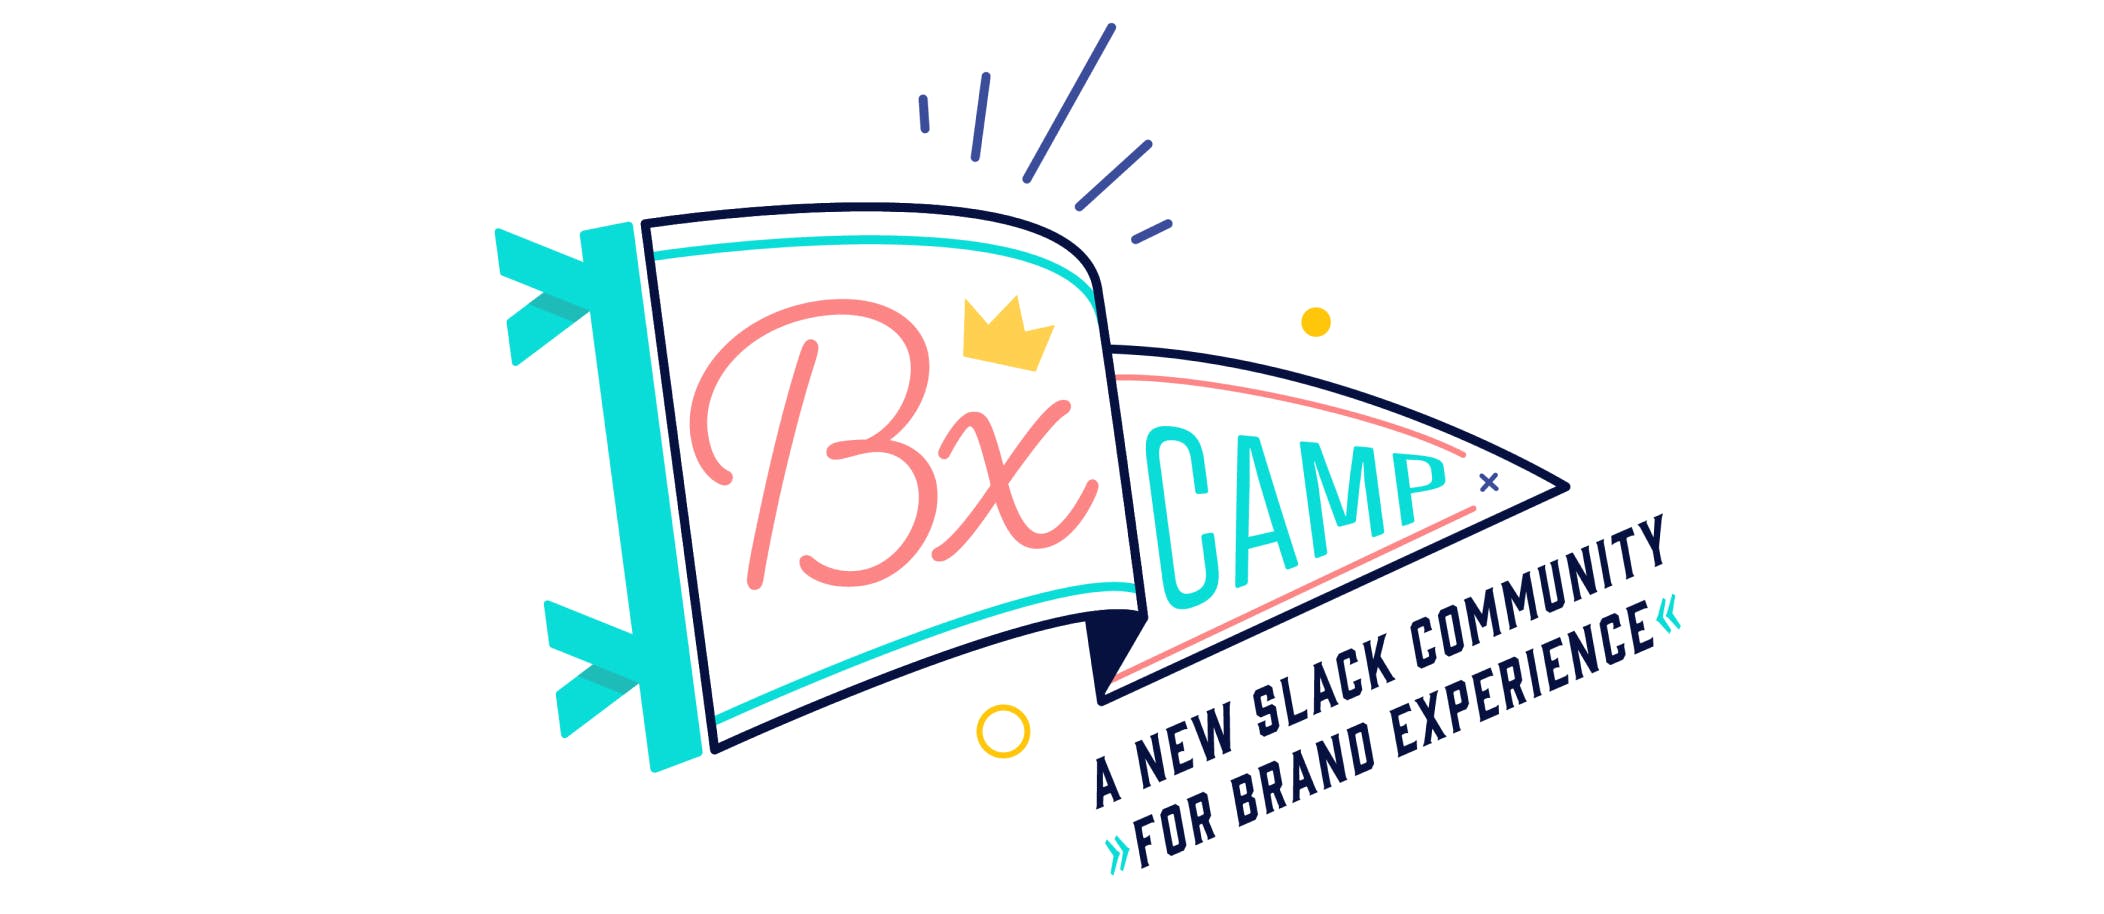 A picture of a flag with the words "BX Camp" with "A new slack community for brand experience" below it.